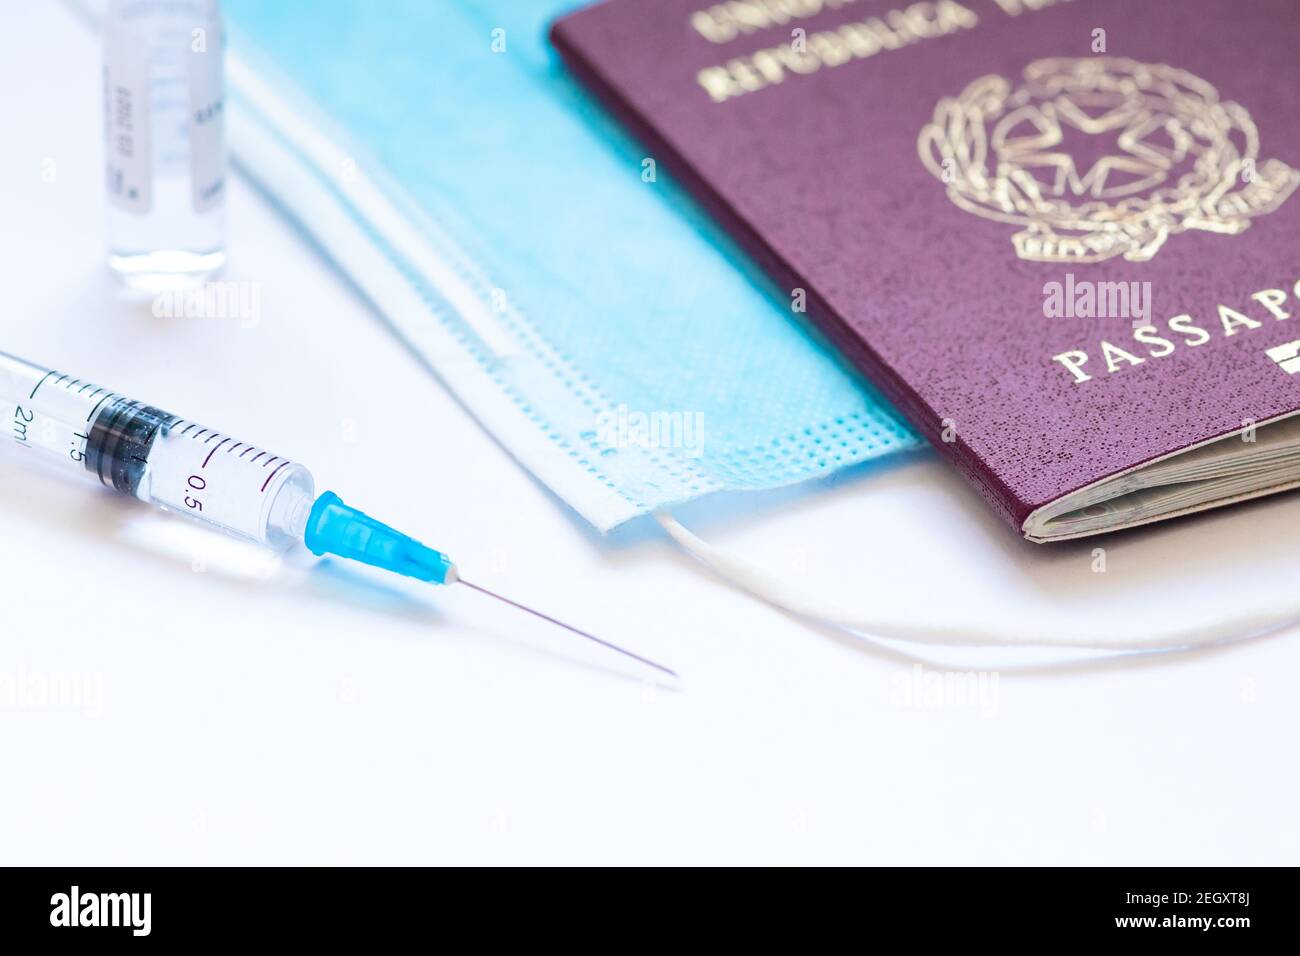 Syringe with needle, vial, surgical face mask and passport or visa on a white table ready to be used. Covid or Coronavirus vaccine background Stock Photo